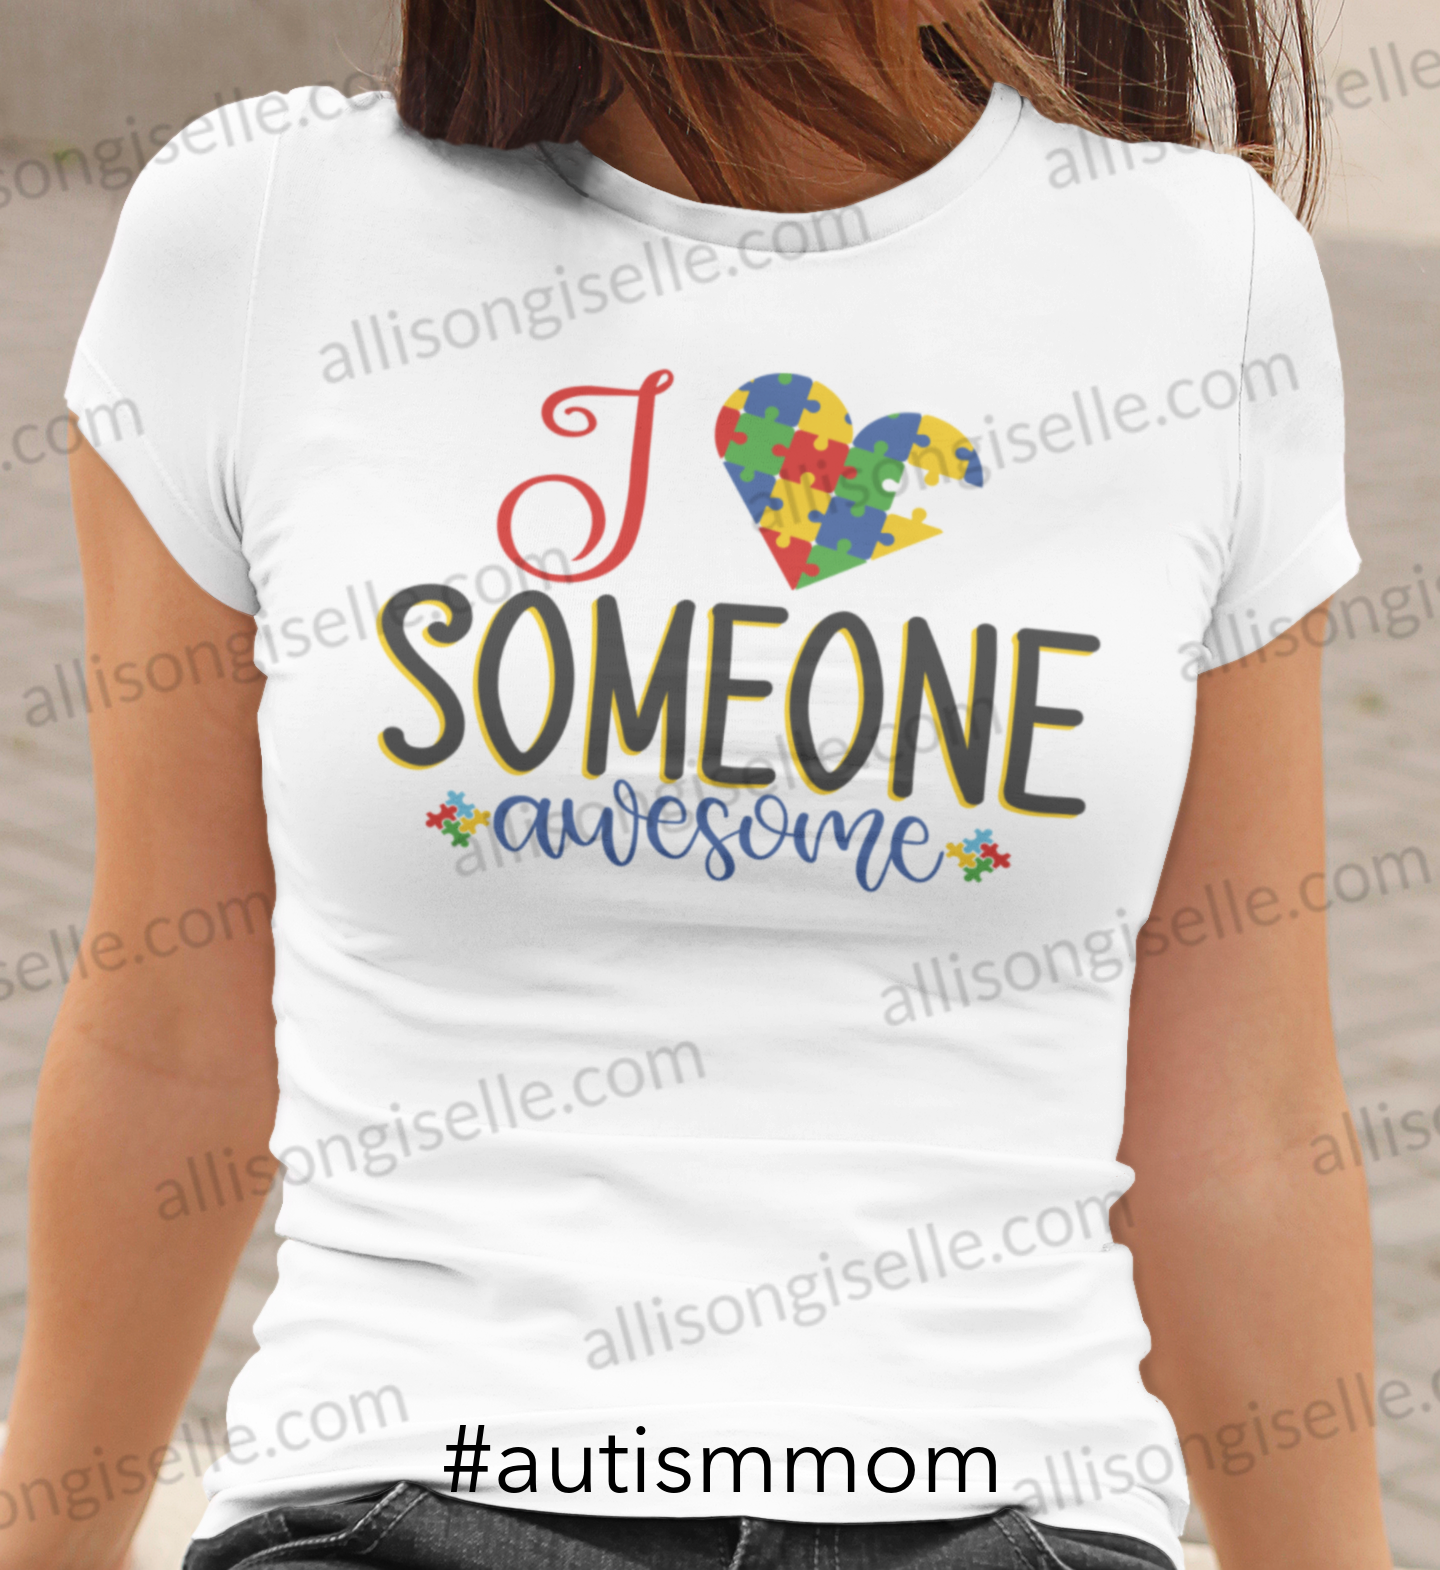 I Love Someone Awesome Autism Shirt, Adult Autism Awareness shirts, Autism Shirt Adult, Adult Autism Shirt, Autism Awareness Shirt Adult